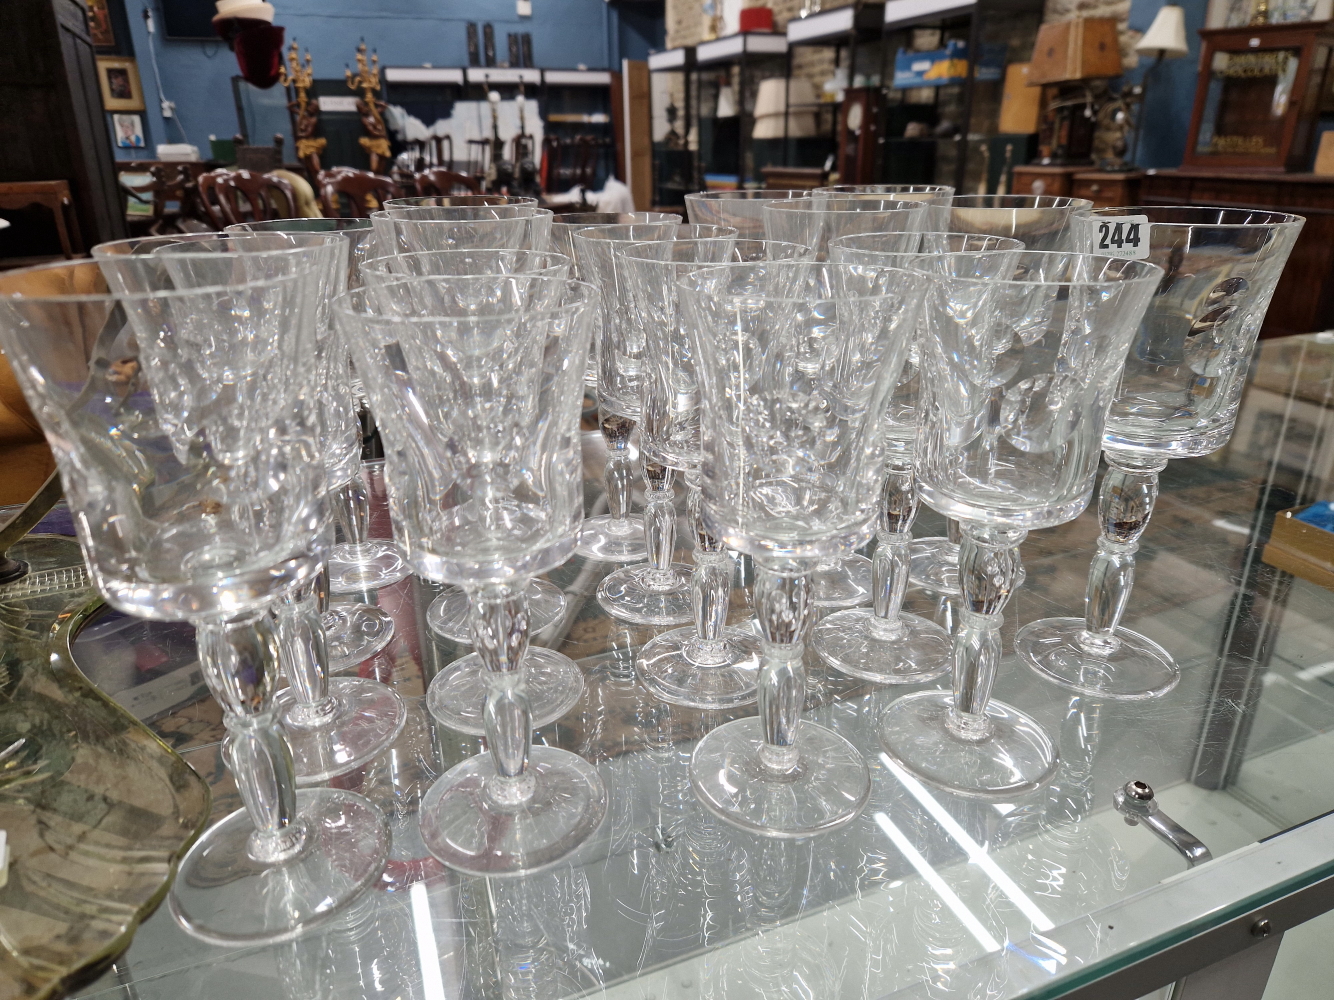 NINETEEN ST LOUIS WINE GLASSES, EACH WITH THE BUCKET BOWL CUT WITH ROUNDELS, THE TWO PART SWOLLEN